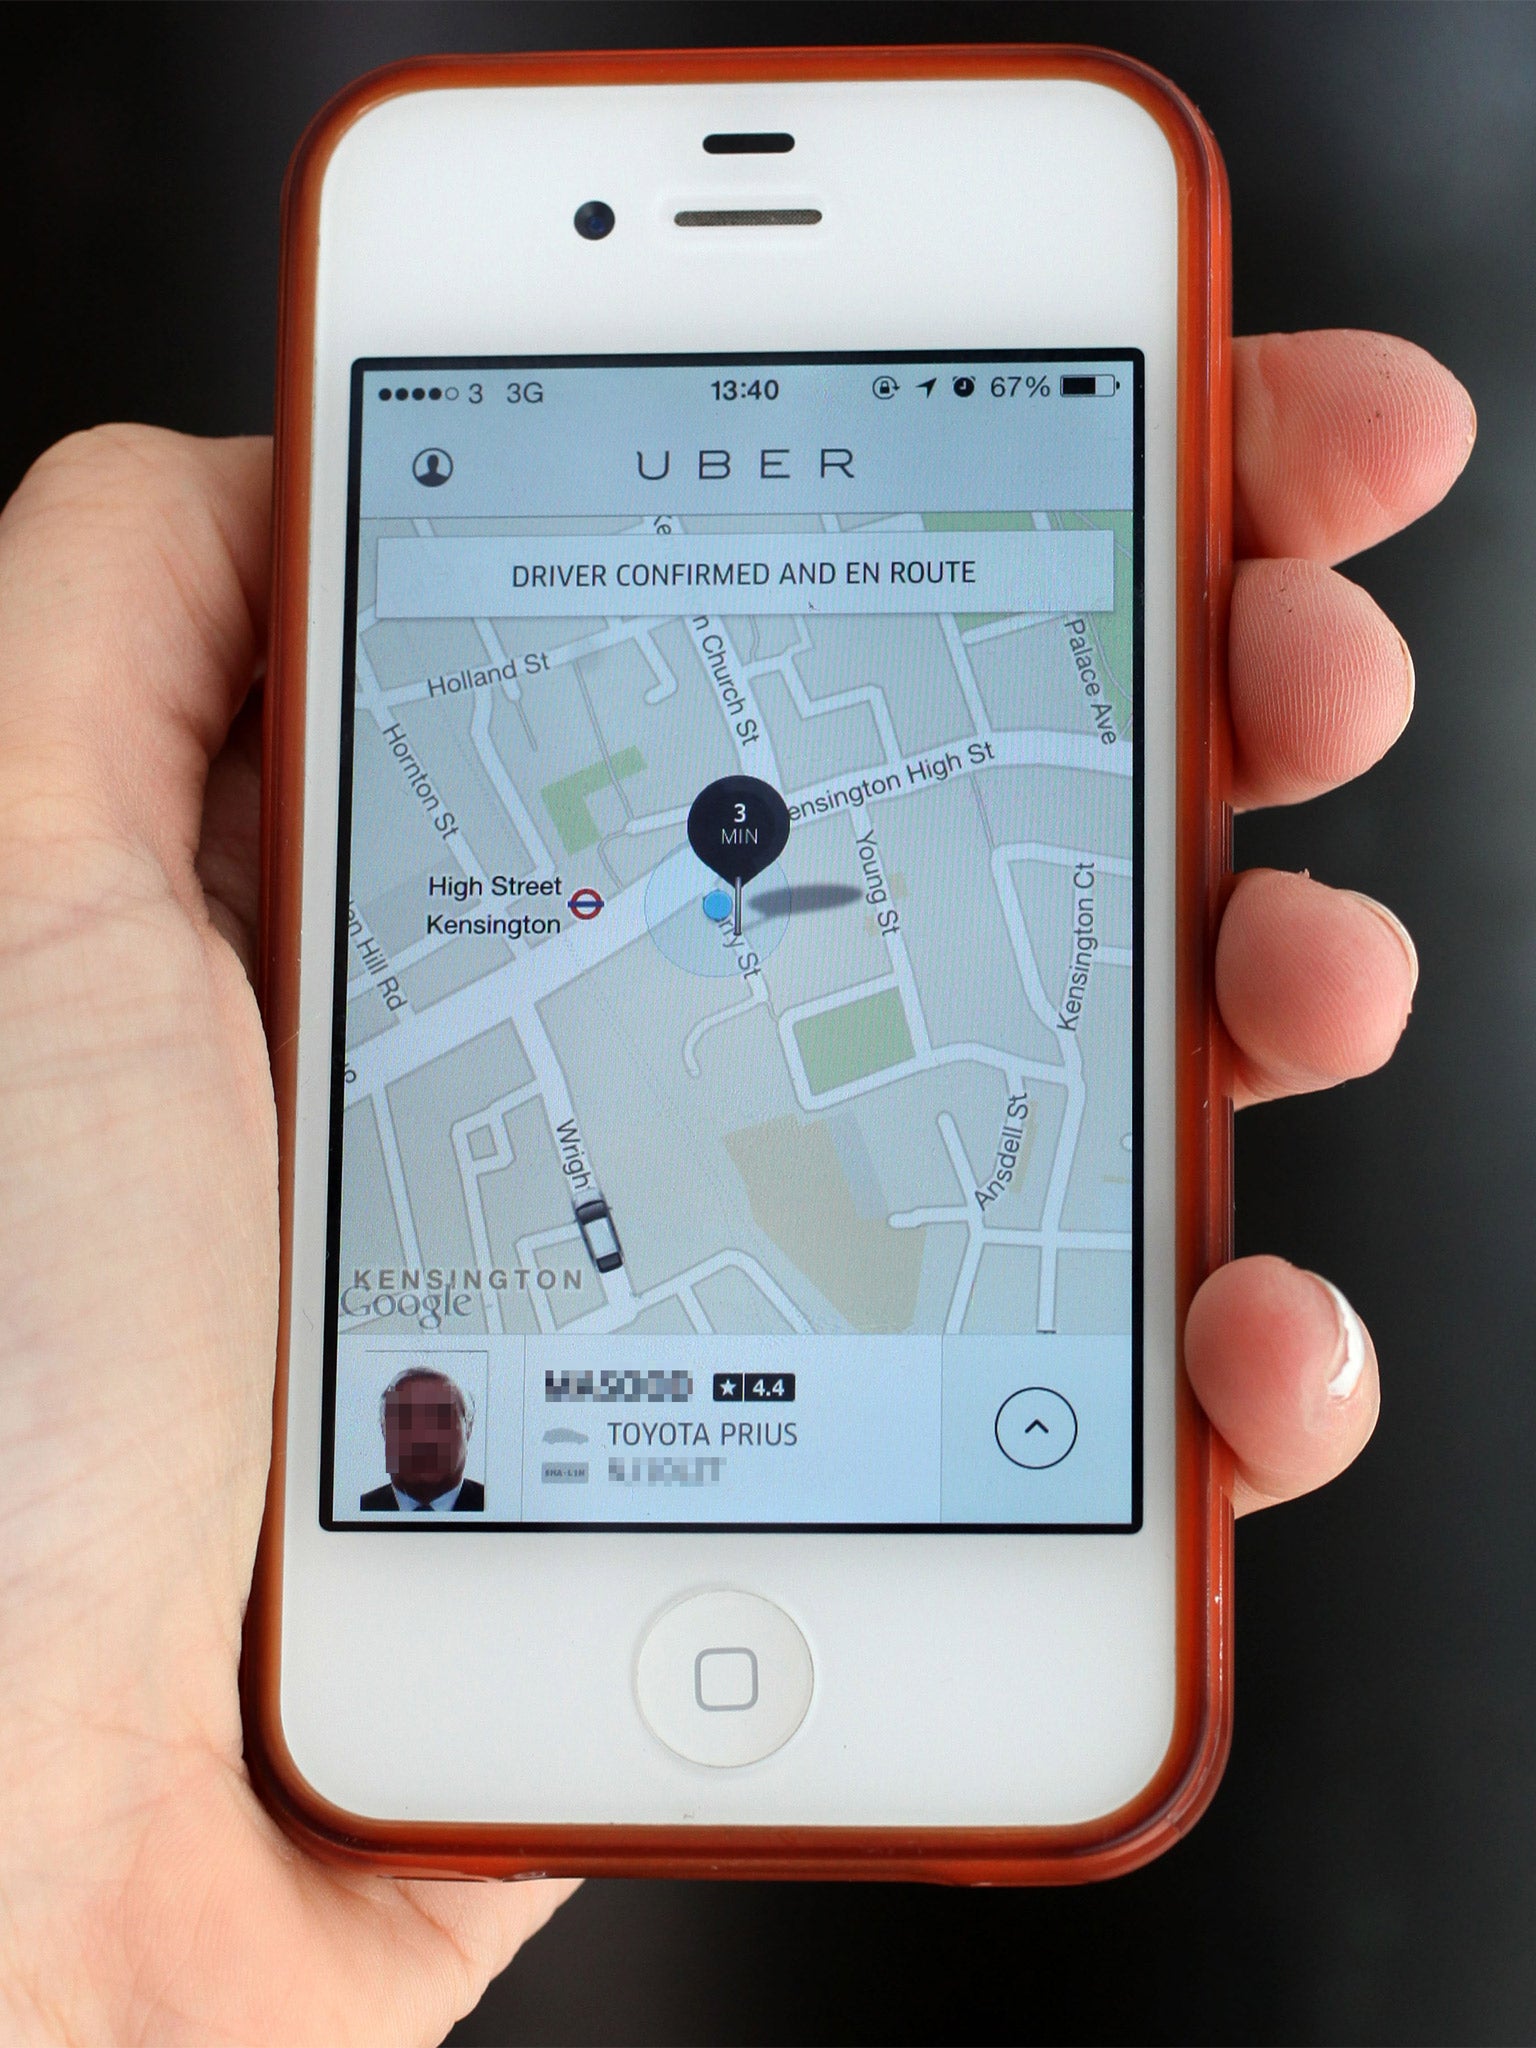 The Uber app locates nearby taxis